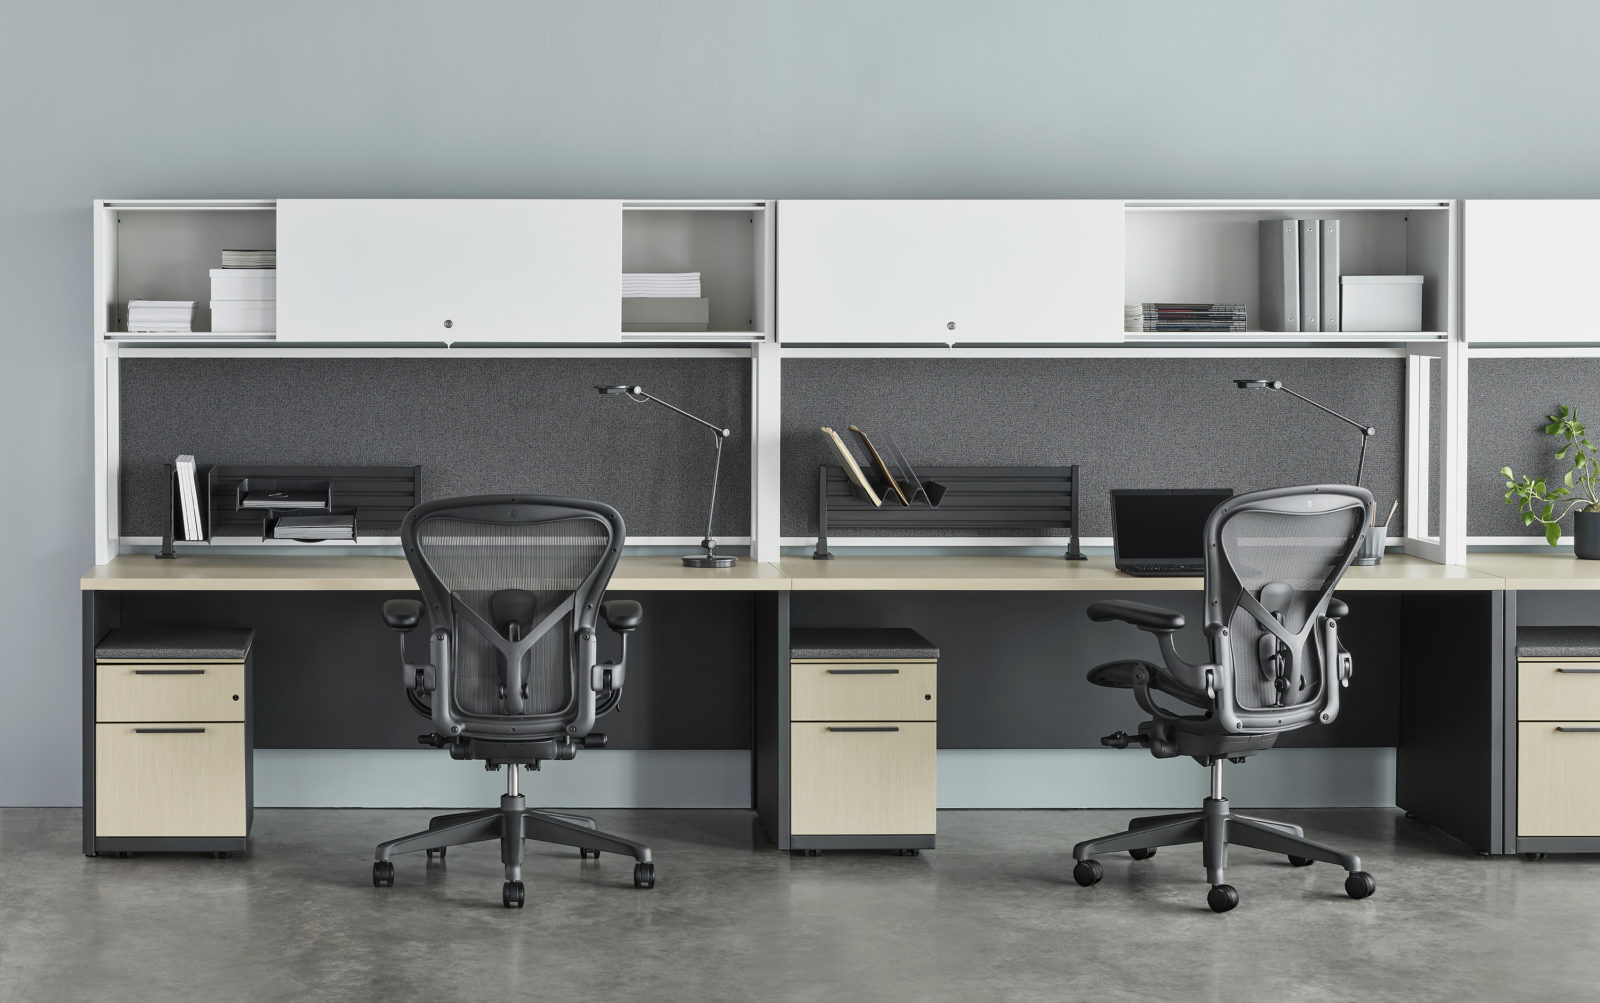 Straight run of Herman Miller workstations with white overhead storage, Aeron chairs and mobile pedestals